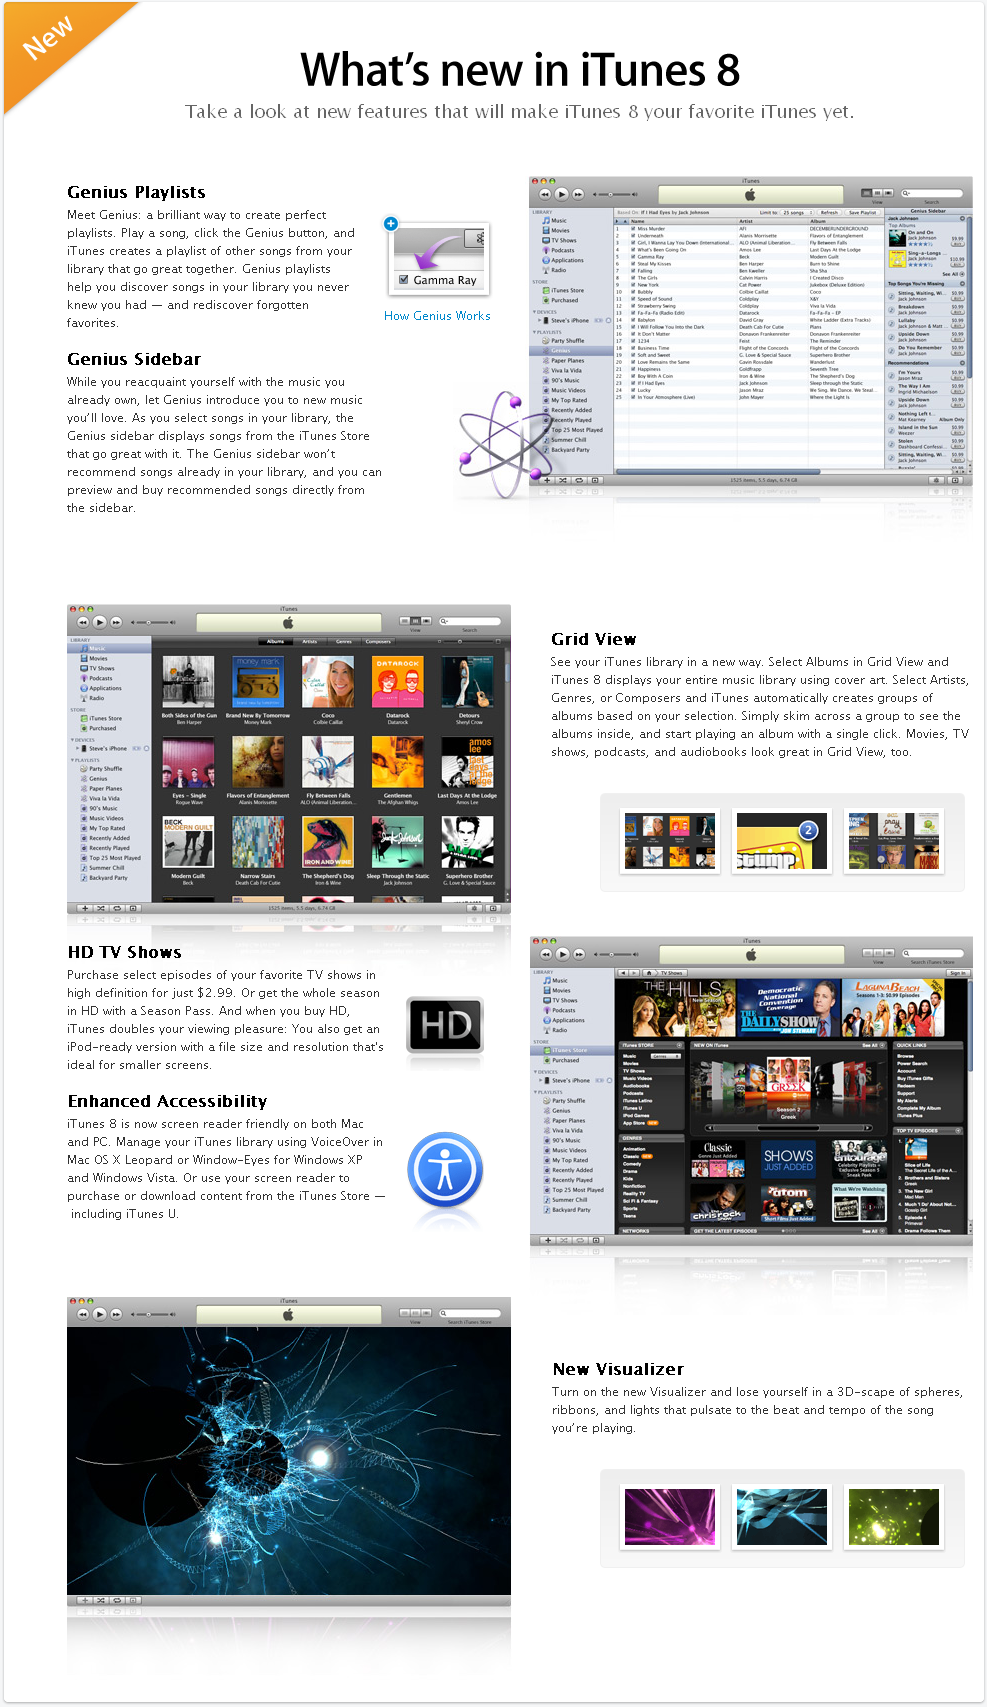 Website on the New Features of iTunes 8